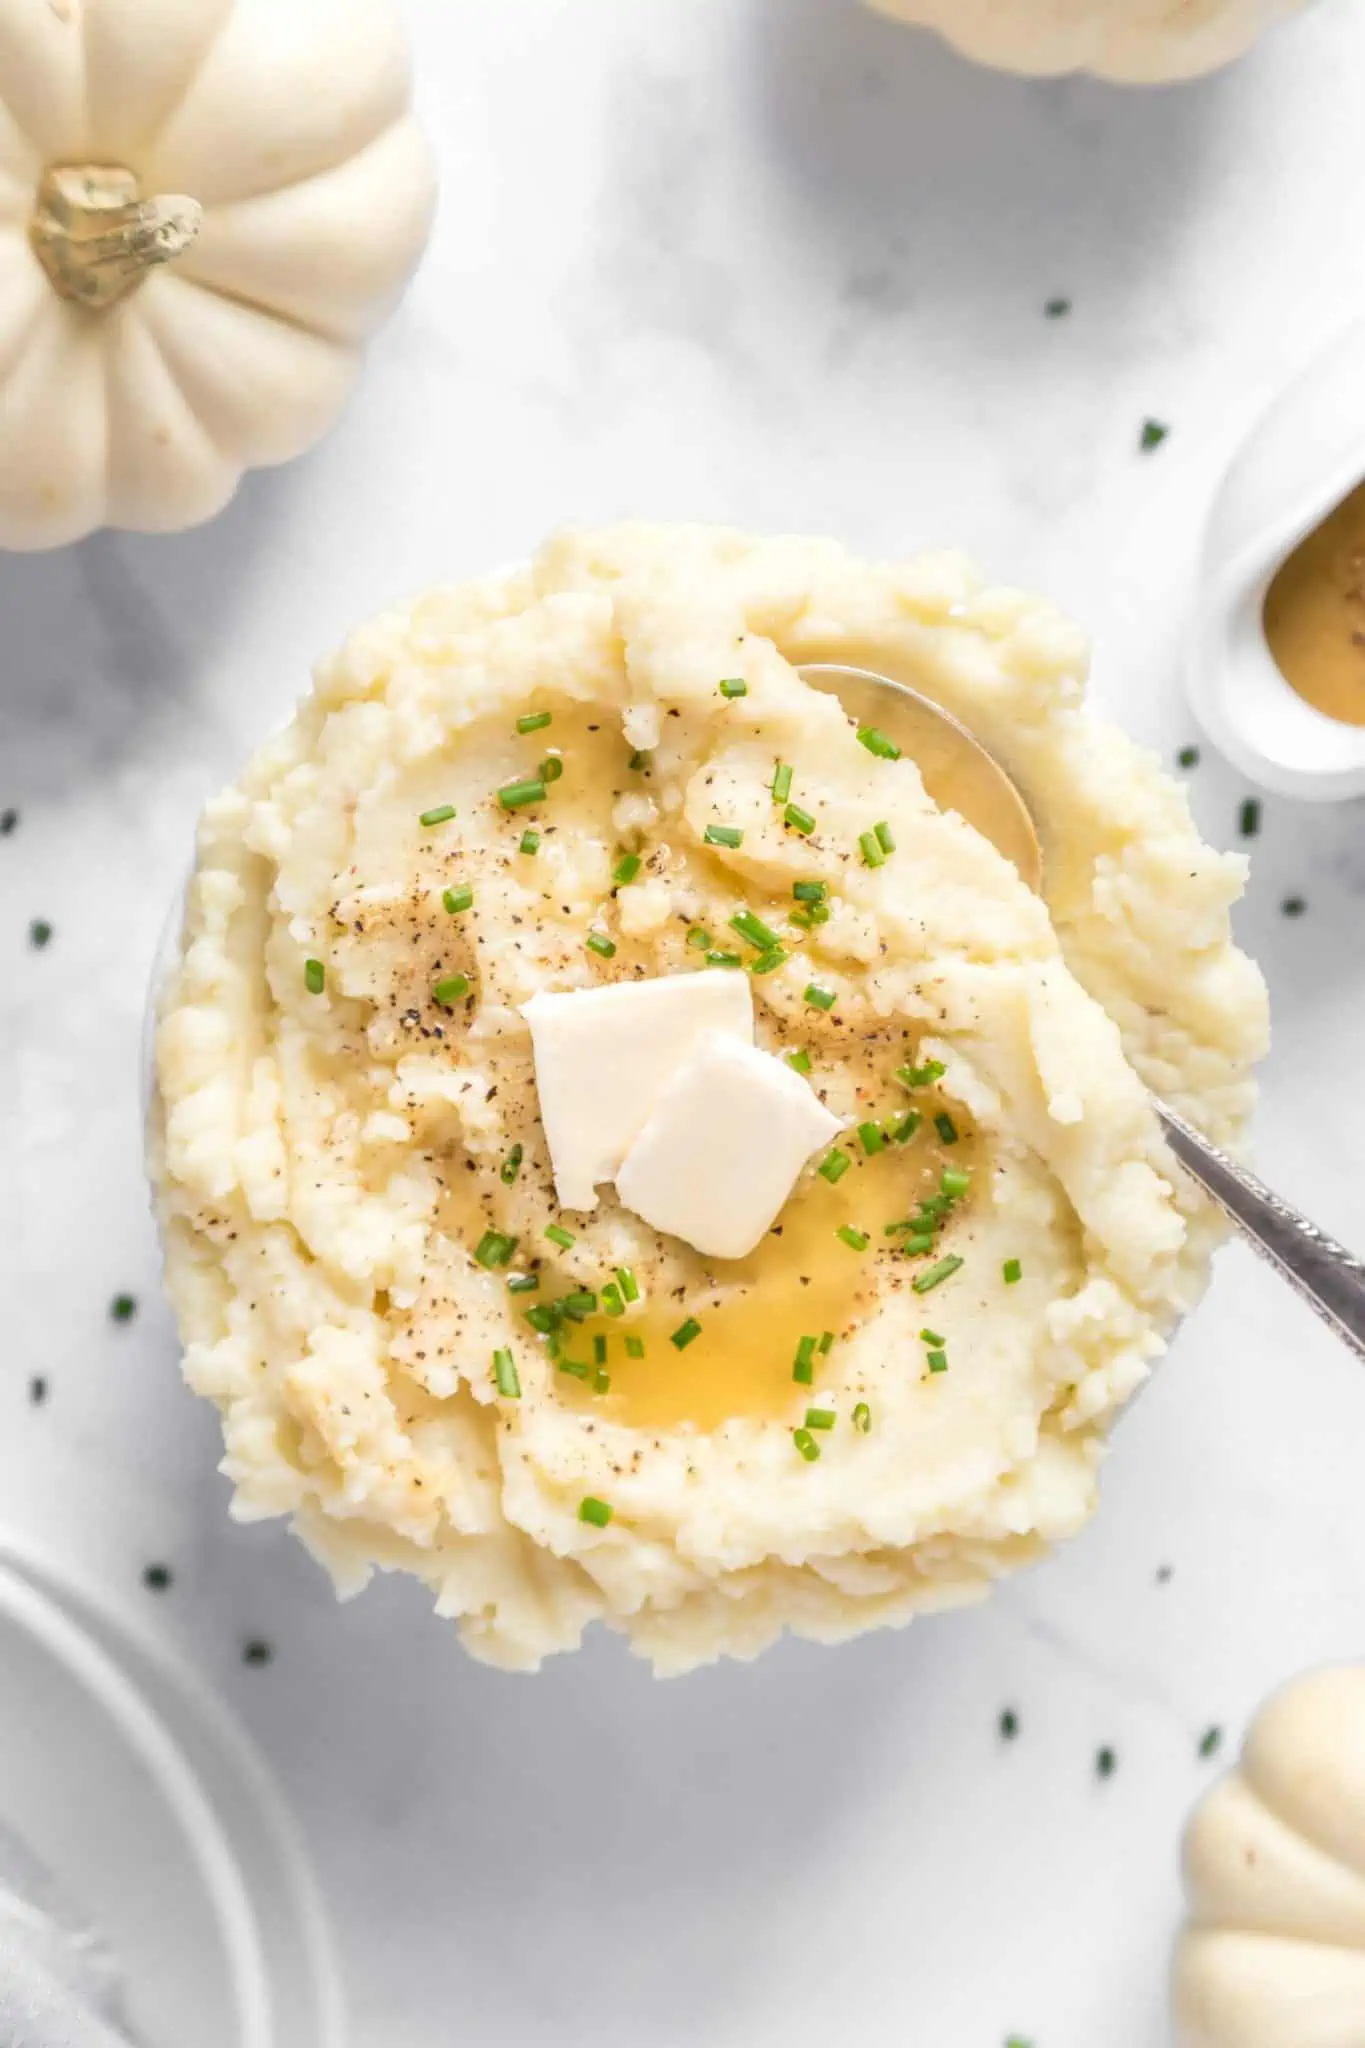 Best Dairy-Free Mashed Potato Recipe Served in a Bowl With Vegan Butter and Chives